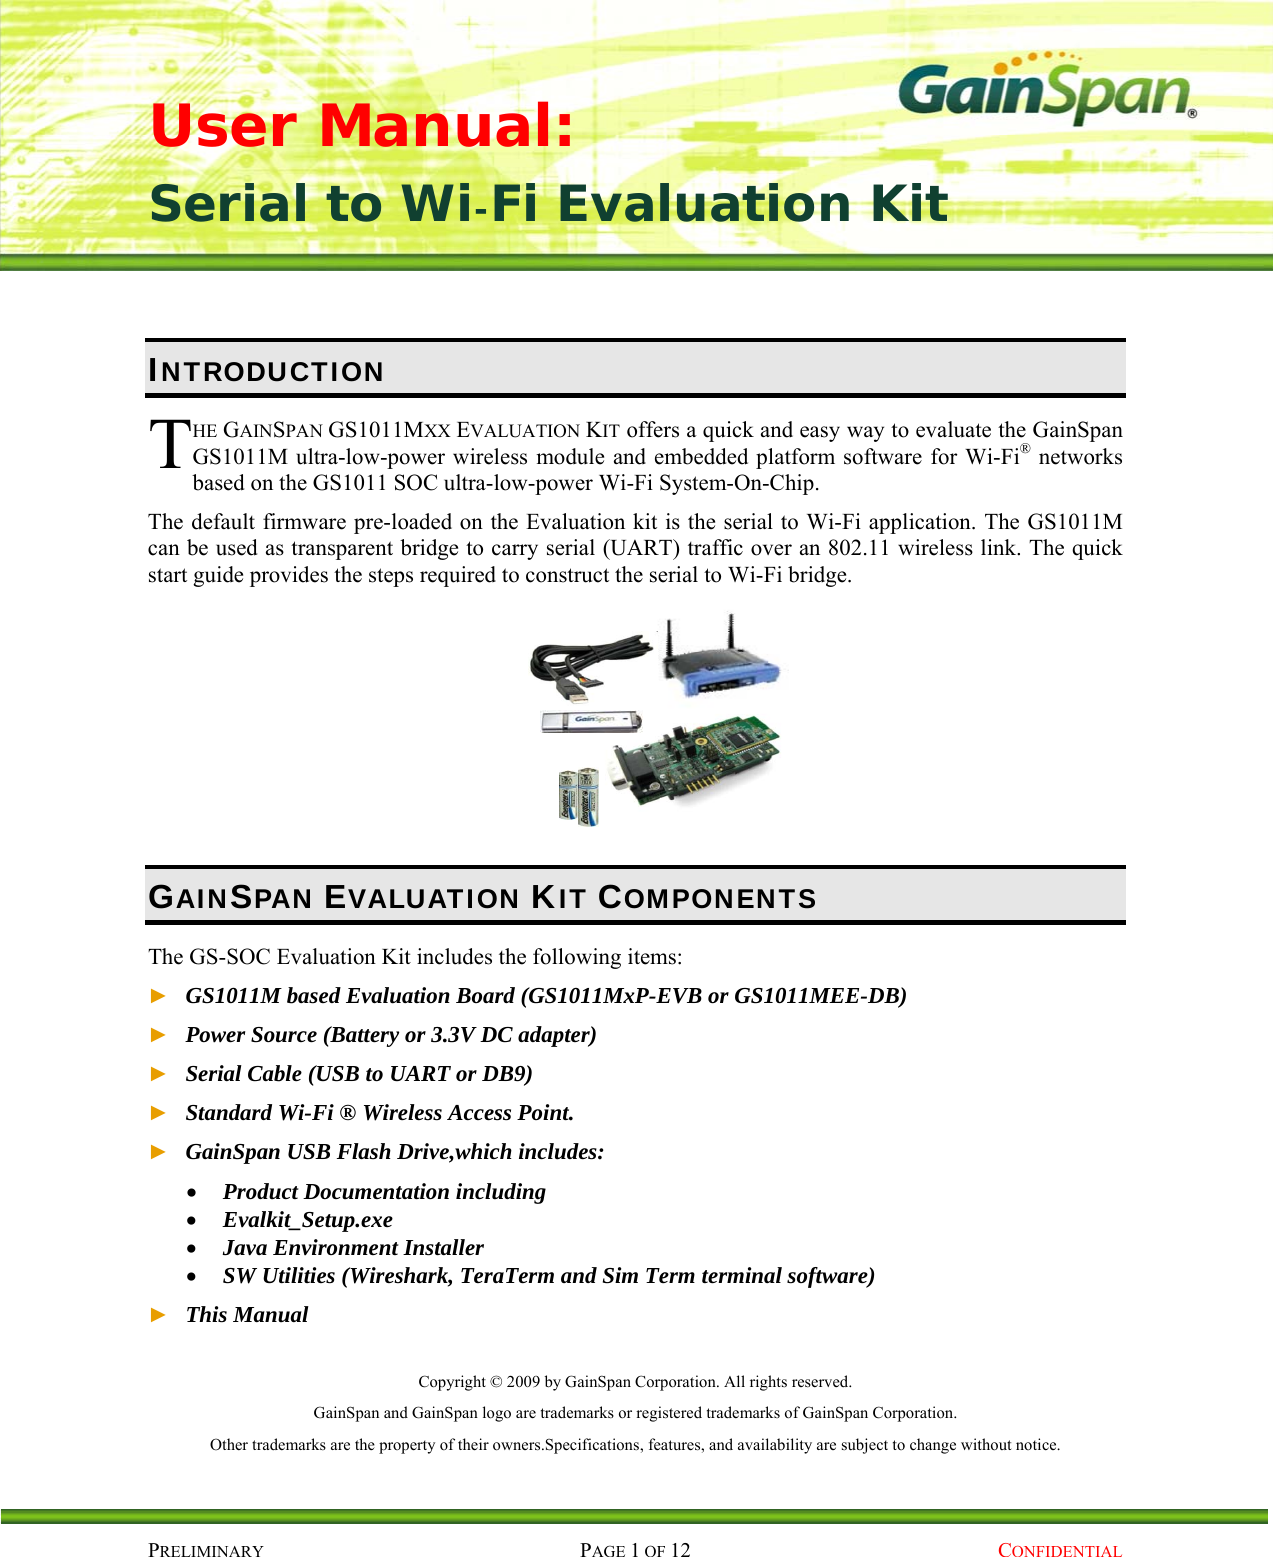 User Manual: Serial to Wi-Fi Evaluation Kit PRELIMINARY PAGE 1 OF 12  CONFIDENTIAL INTRODUCTION HE GAINSPAN GS1011MXX EVALUATION KIT offers a quick and easy way to evaluate the GainSpan GS1011M ultra-low-power wireless module and embedded platform software for Wi-Fi® networks based on the GS1011 SOC ultra-low-power Wi-Fi System-On-Chip. The default firmware pre-loaded on the Evaluation kit is the serial to Wi-Fi application. The GS1011M can be used as transparent bridge to carry serial (UART) traffic over an 802.11 wireless link. The quick start guide provides the steps required to construct the serial to Wi-Fi bridge.  GAINSPAN EVALUATION KIT COMPONENTS The GS-SOC Evaluation Kit includes the following items: ► GS1011M based Evaluation Board (GS1011MxP-EVB or GS1011MEE-DB) ► Power Source (Battery or 3.3V DC adapter) ► Serial Cable (USB to UART or DB9) ► Standard Wi-Fi ® Wireless Access Point. ► GainSpan USB Flash Drive,which includes:  Product Documentation including  Evalkit_Setup.exe  Java Environment Installer  SW Utilities (Wireshark, TeraTerm and Sim Term terminal software) ► This Manual  Copyright © 2009 by GainSpan Corporation. All rights reserved. GainSpan and GainSpan logo are trademarks or registered trademarks of GainSpan Corporation. Other trademarks are the property of their owners.Specifications, features, and availability are subject to change without notice. T 